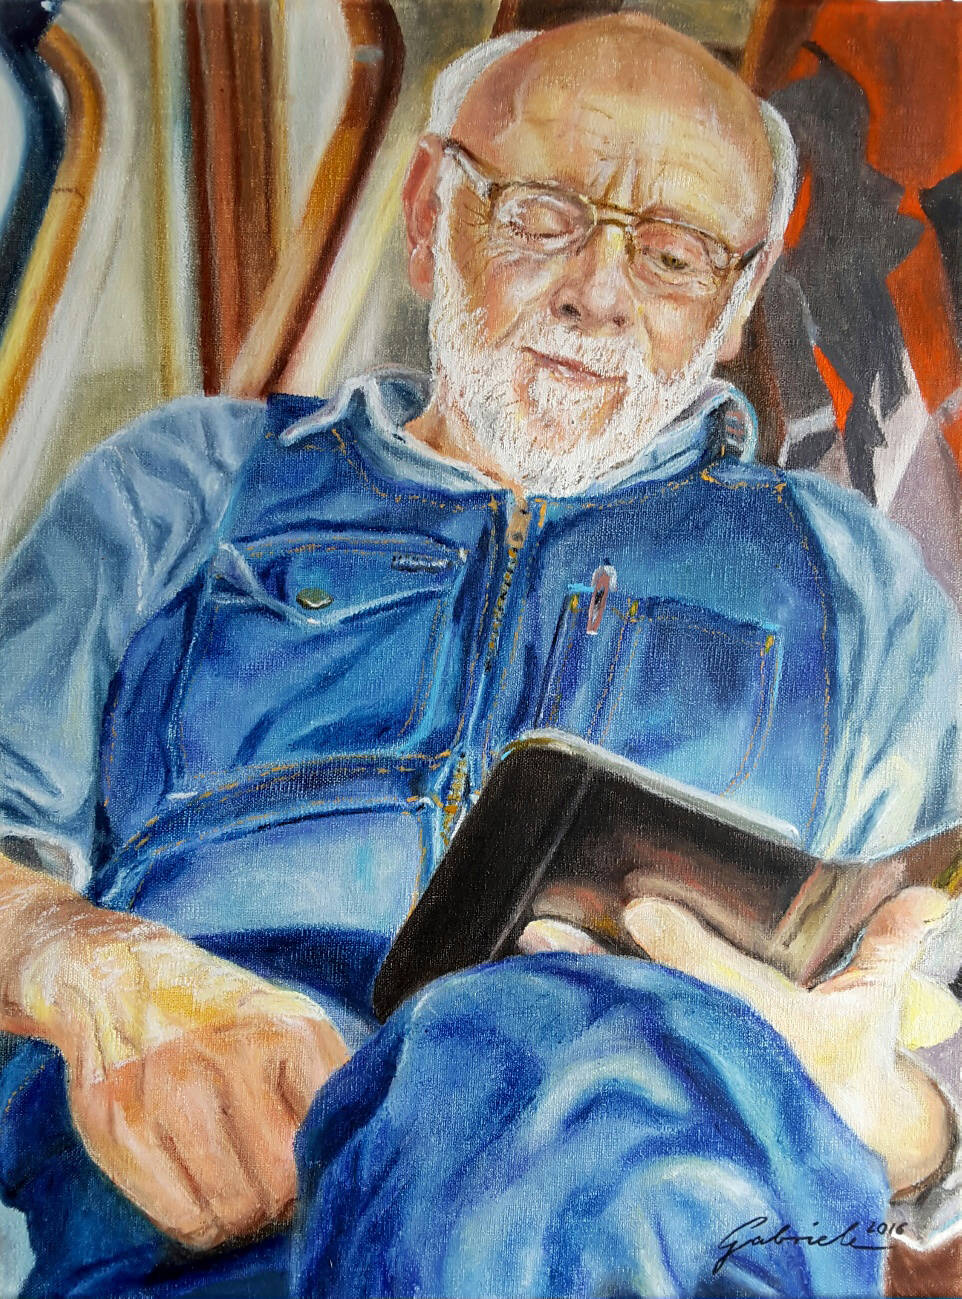 A painting of Joseph Bettis by Gabriele Beyer.